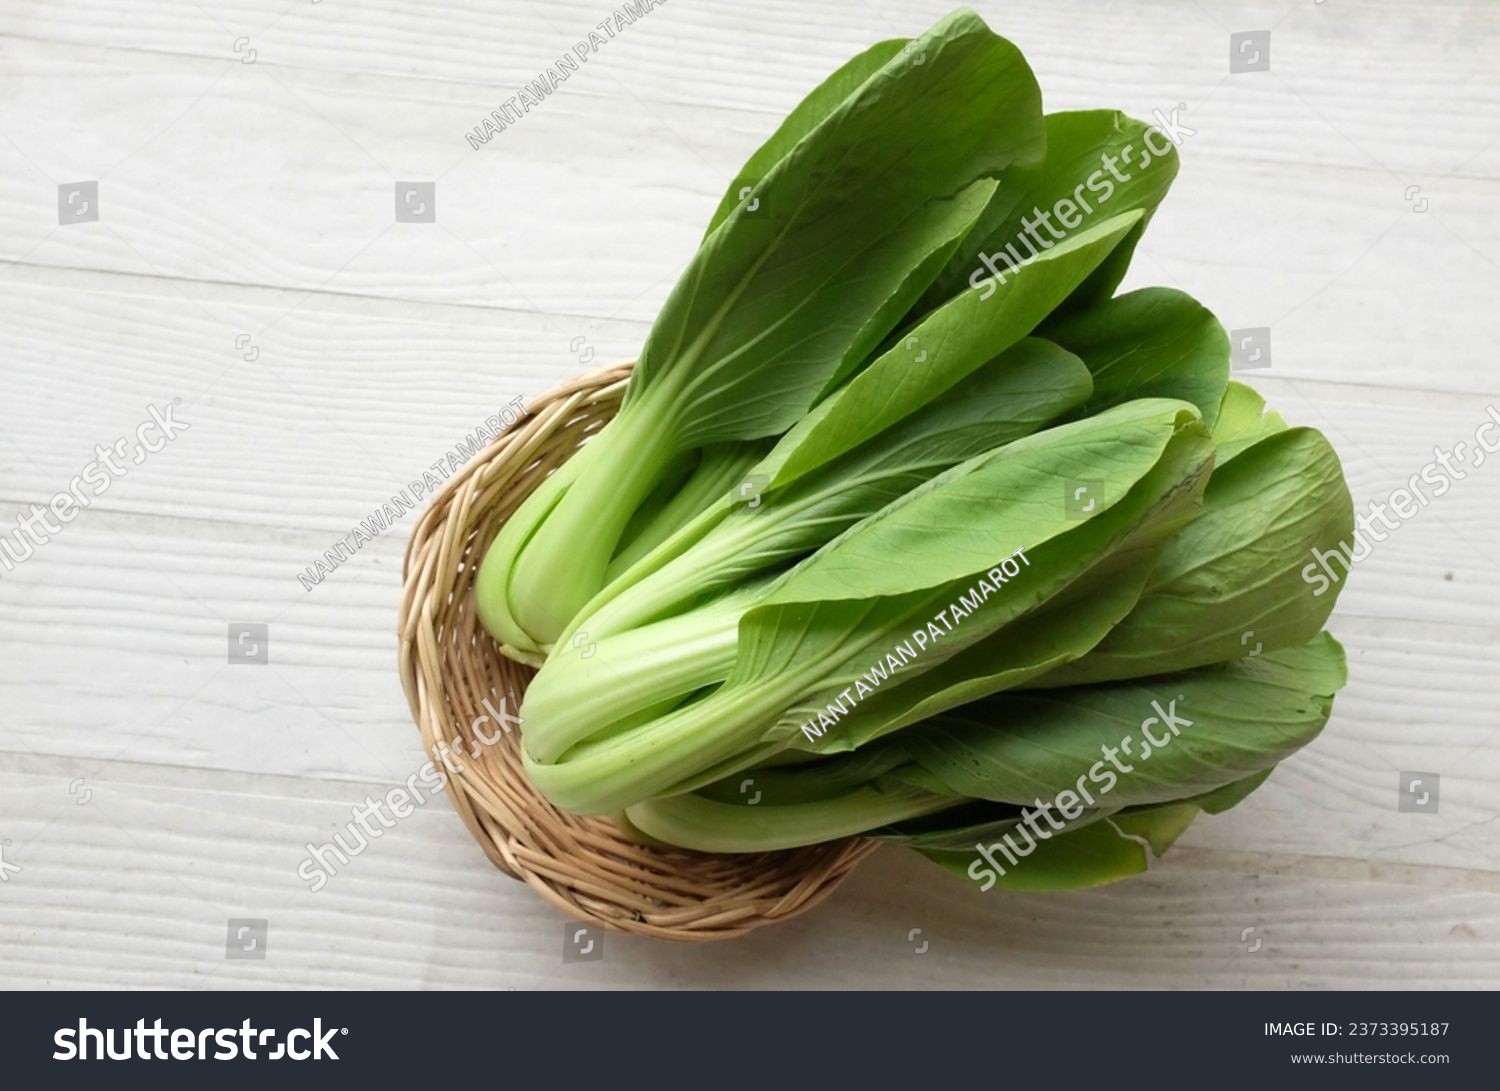 fresh and yummy green leaves Bok choy,Chinese cabbage,cantonese lettuce ,Bok Choy(Chinese cabbage) small choy sum,green pak choi, chinese chard (brassica rapa subsp. chinensis) in bamboo basket  #2373395187